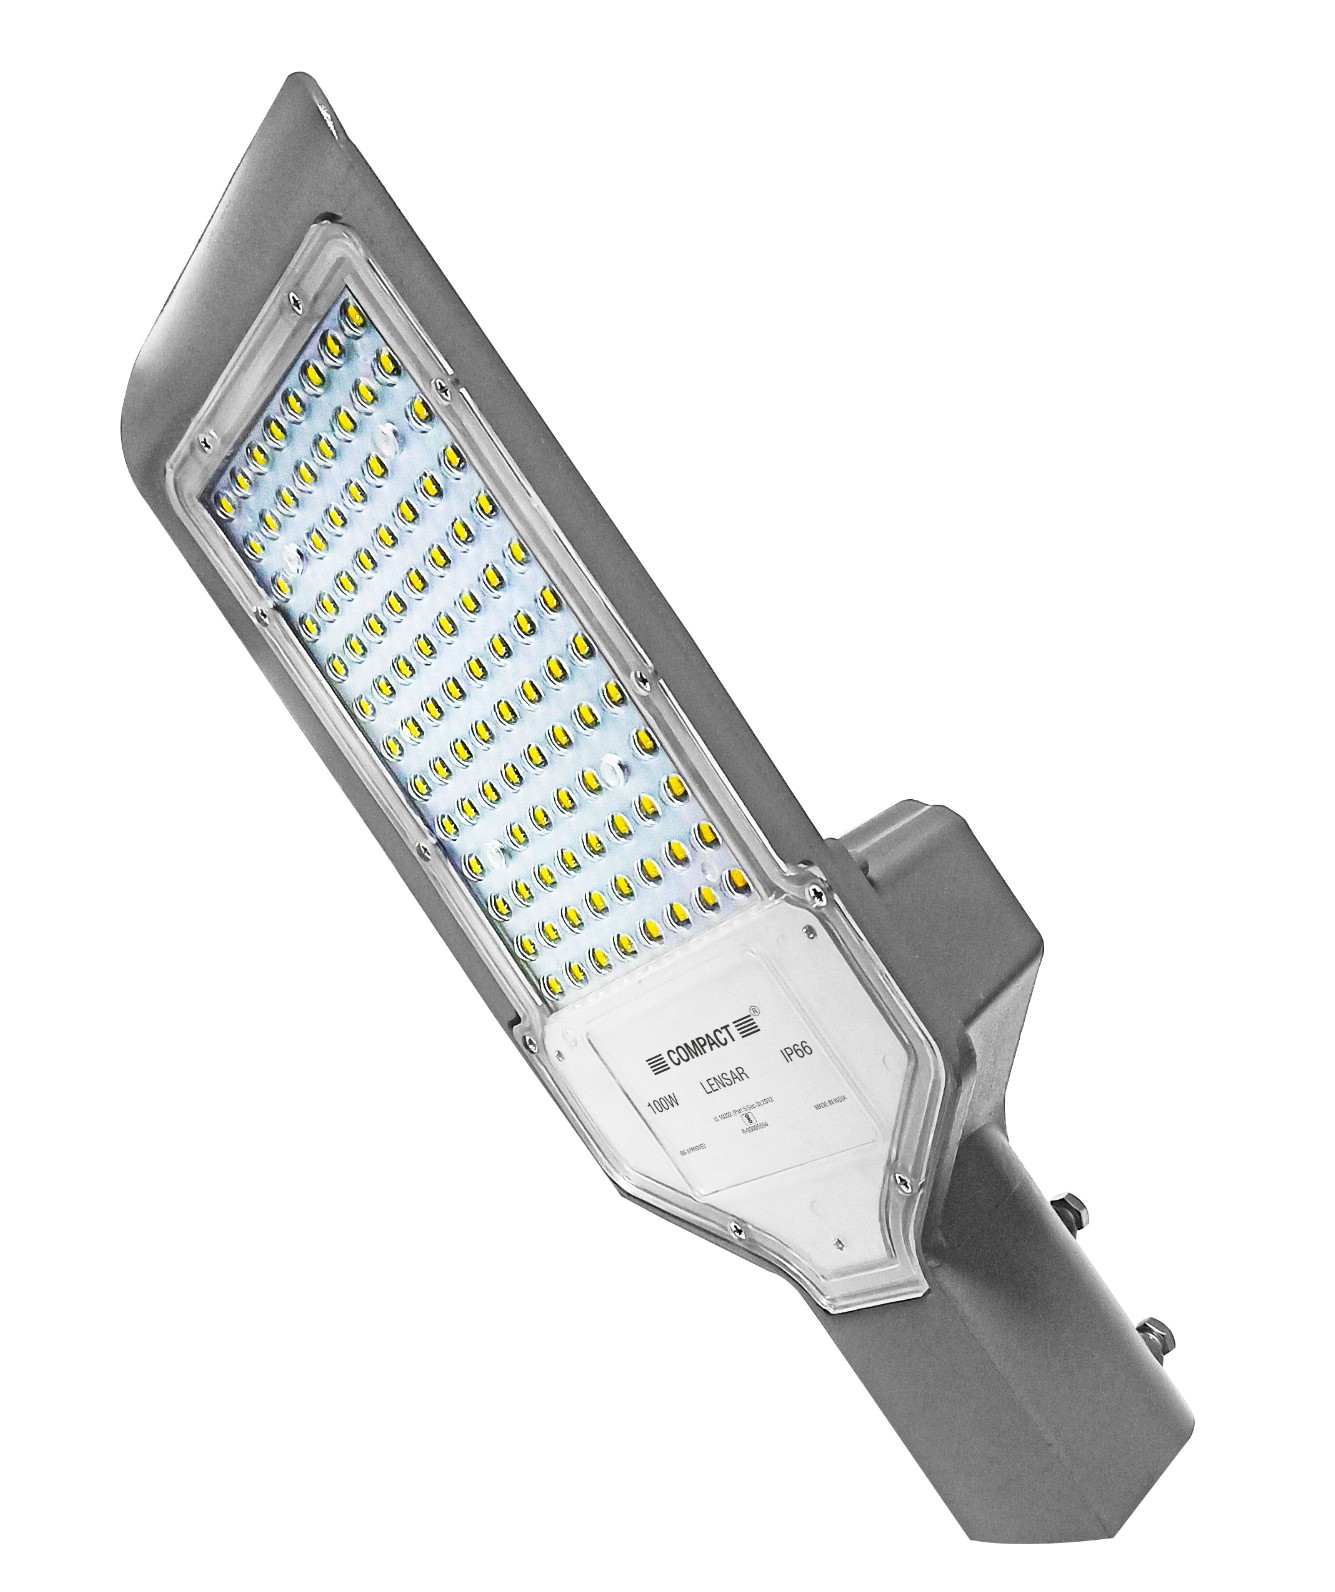 Buy COMPACT 100 W Warm White IP66 LED Street Lights online at best